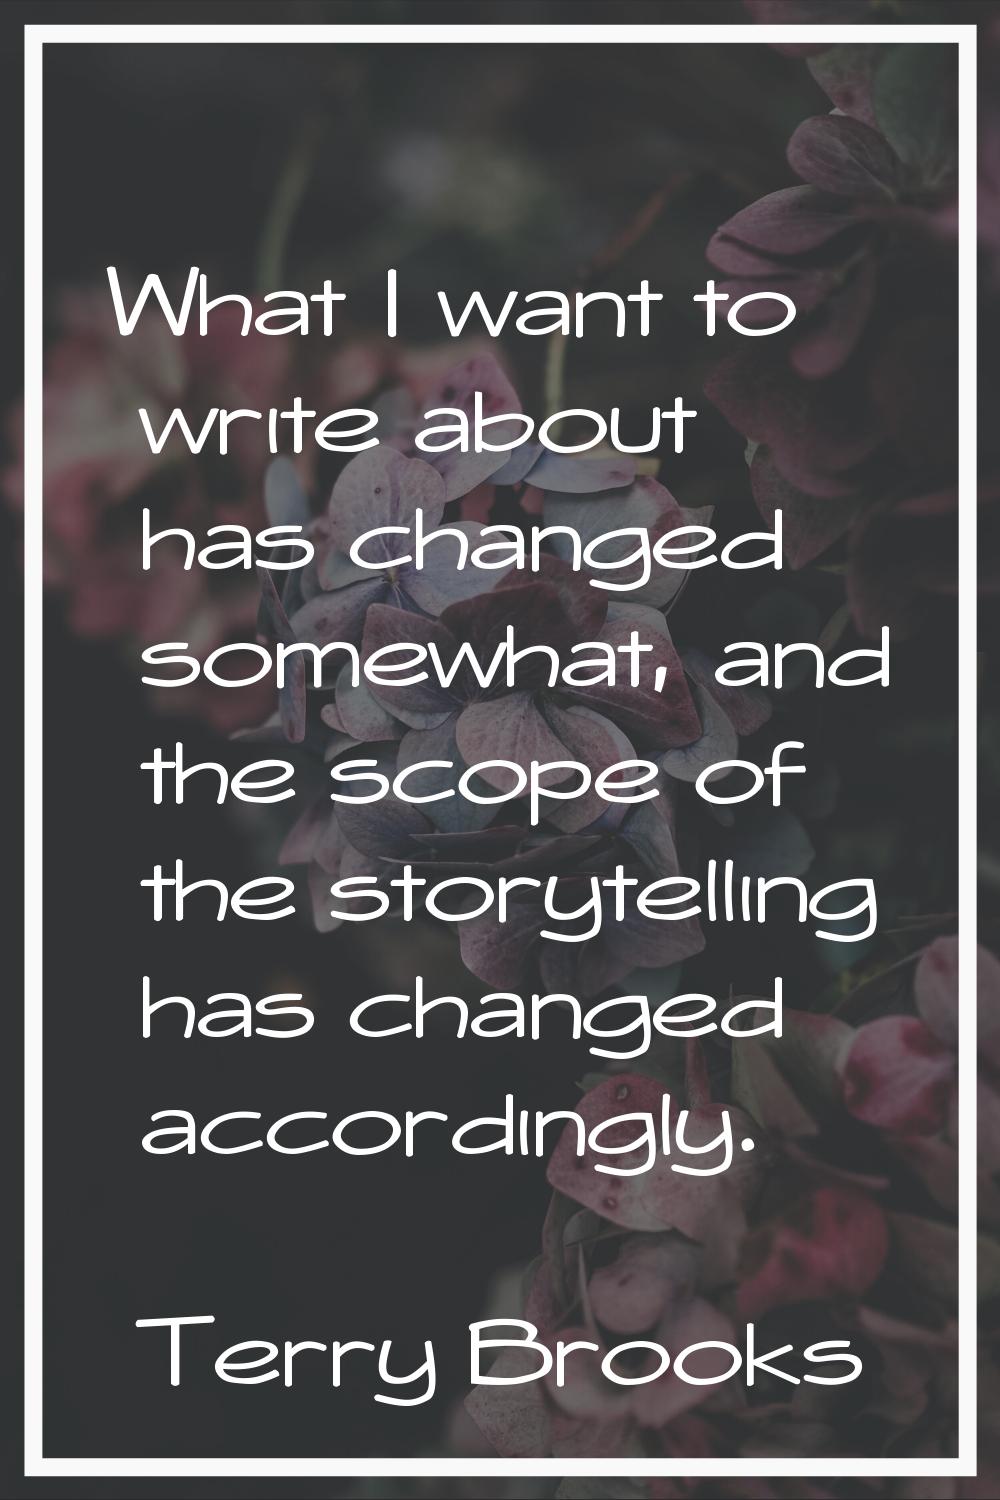 What I want to write about has changed somewhat, and the scope of the storytelling has changed acco